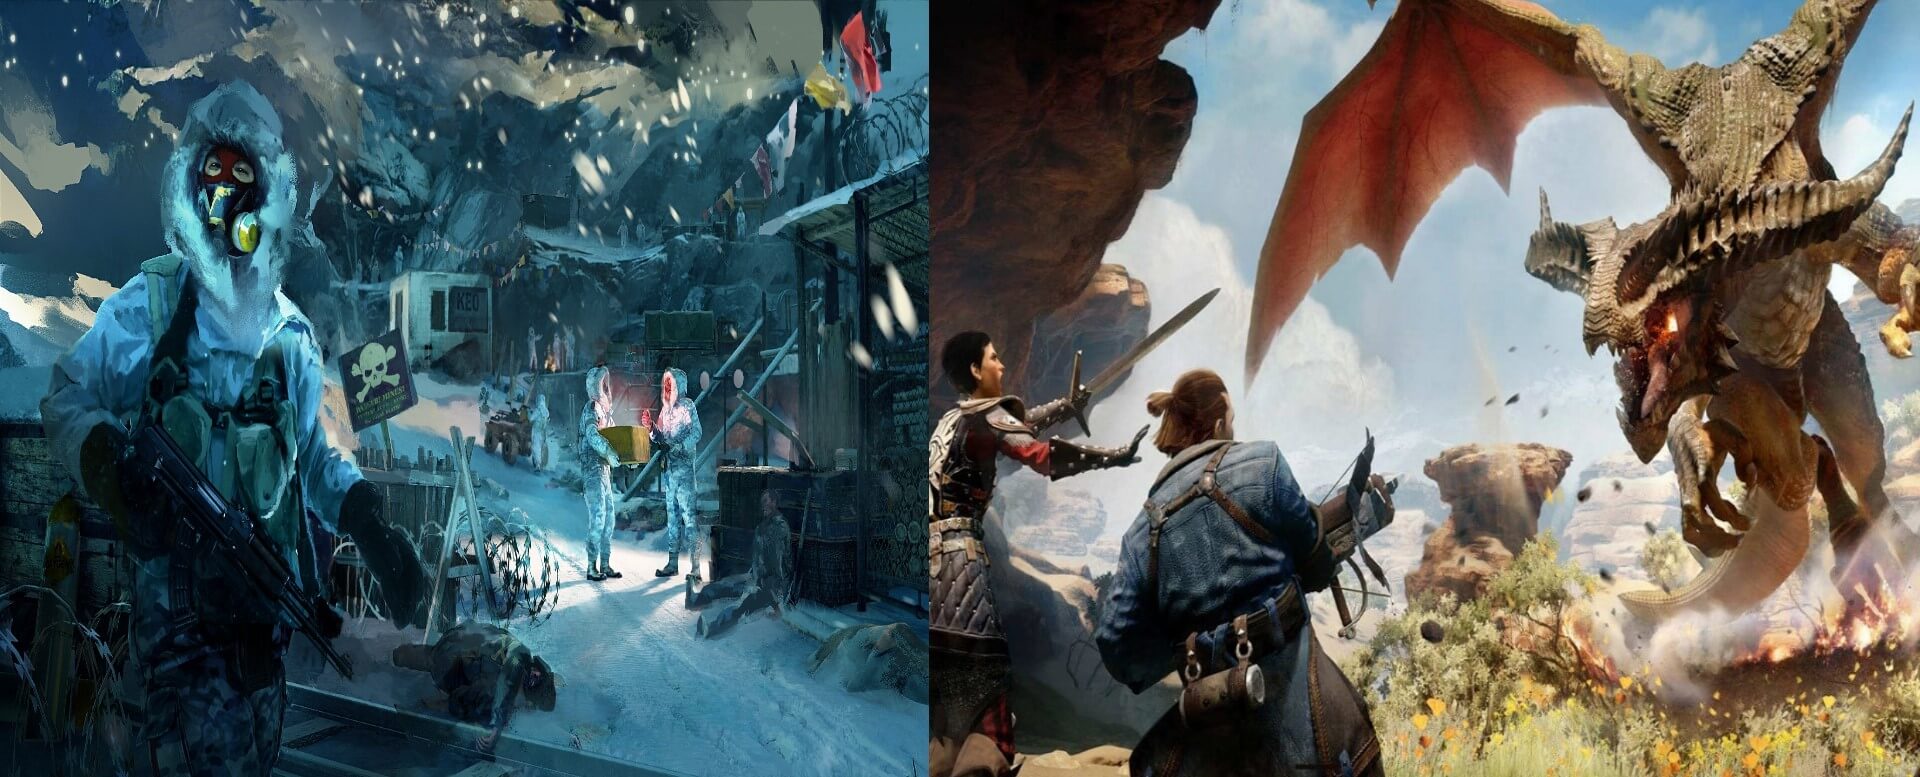 Far Cry 4 and Dragon Age Inquisition